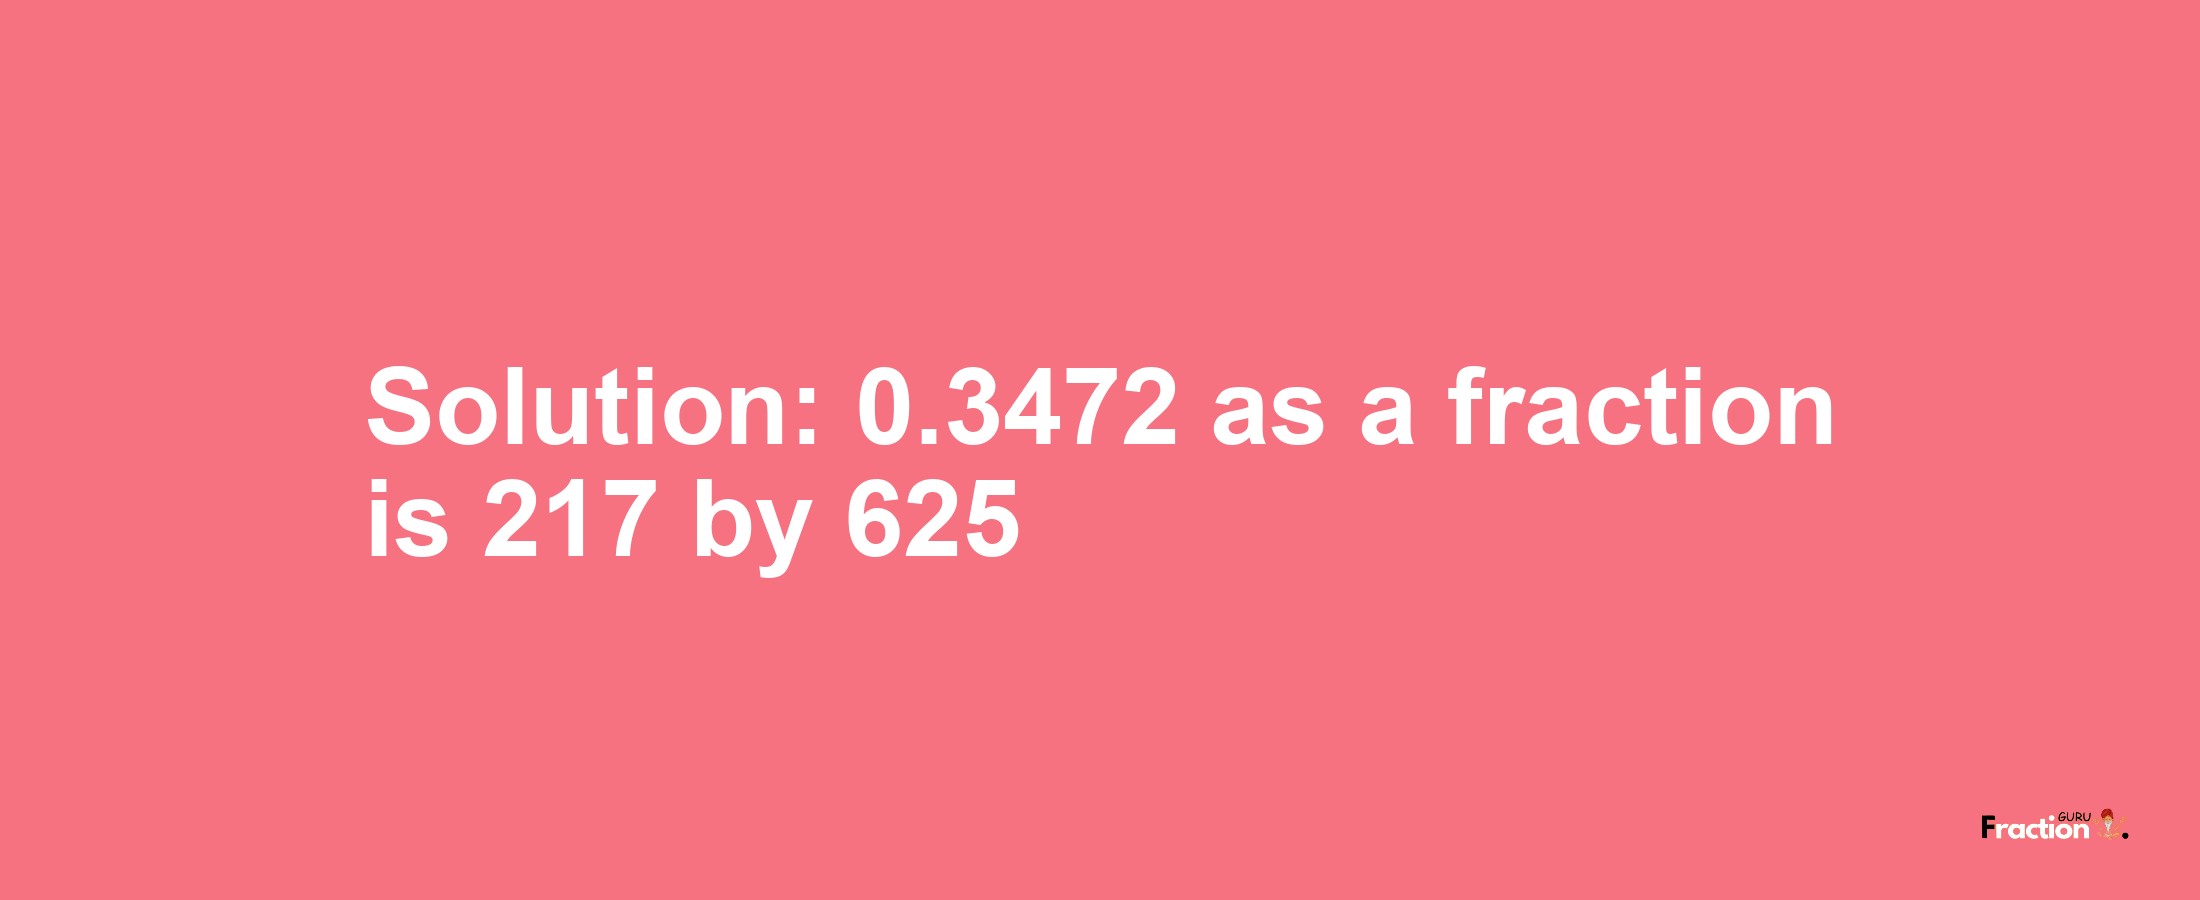 Solution:0.3472 as a fraction is 217/625